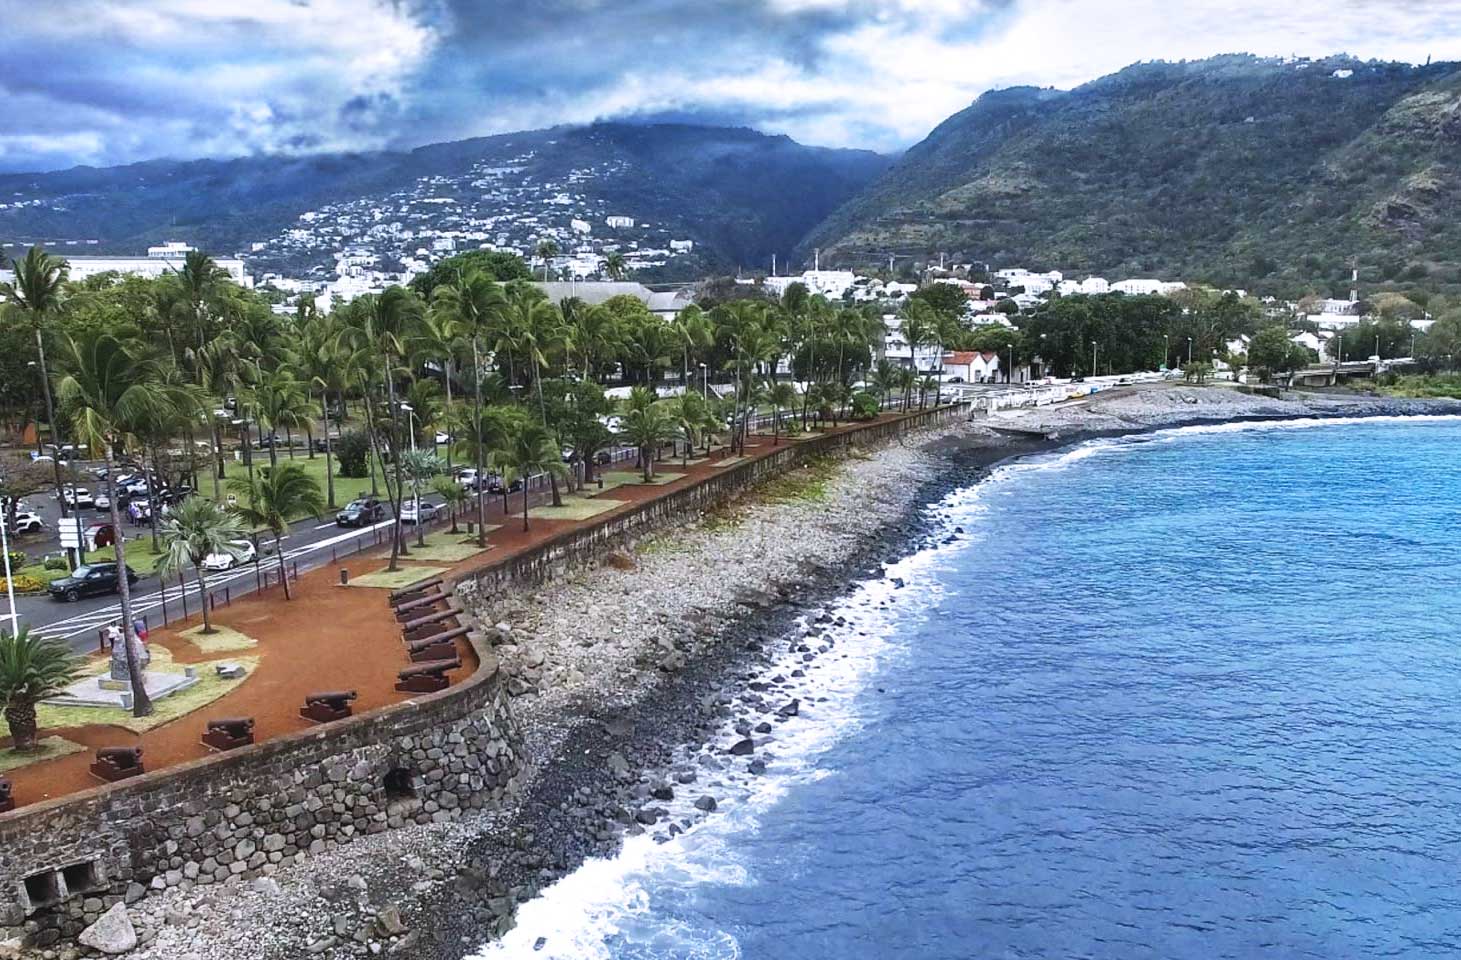 City Break: What to do & see in Saint‑Denis, Reunion Island